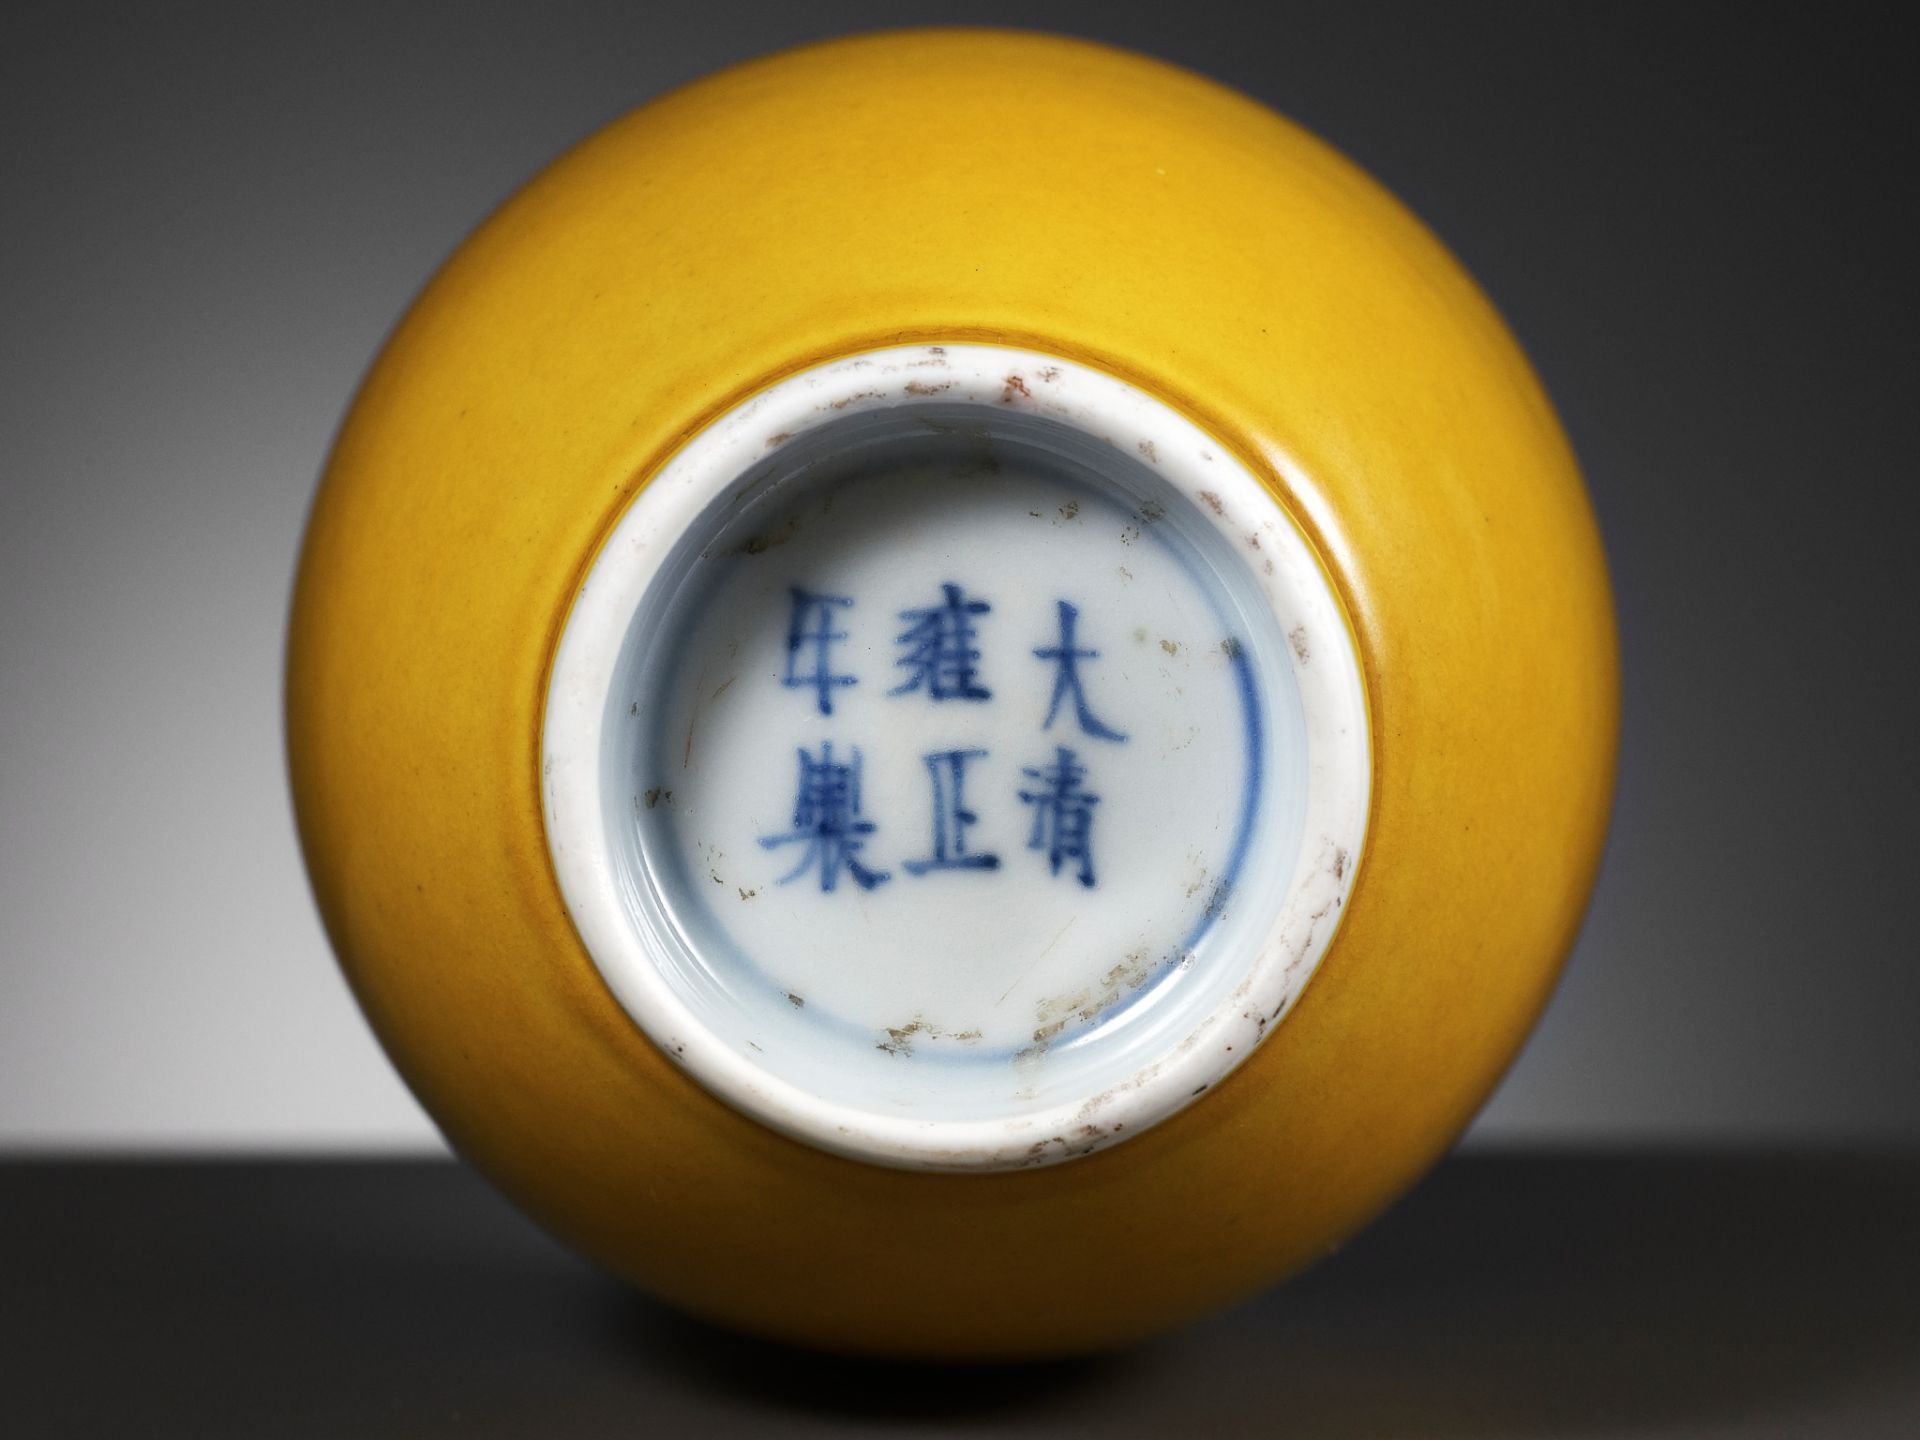 AN IMPERIAL YELLOW-GLAZED MONOCHROME MALLET VASE, YONGZHENG MARK, QING DYNASTY - Image 3 of 9